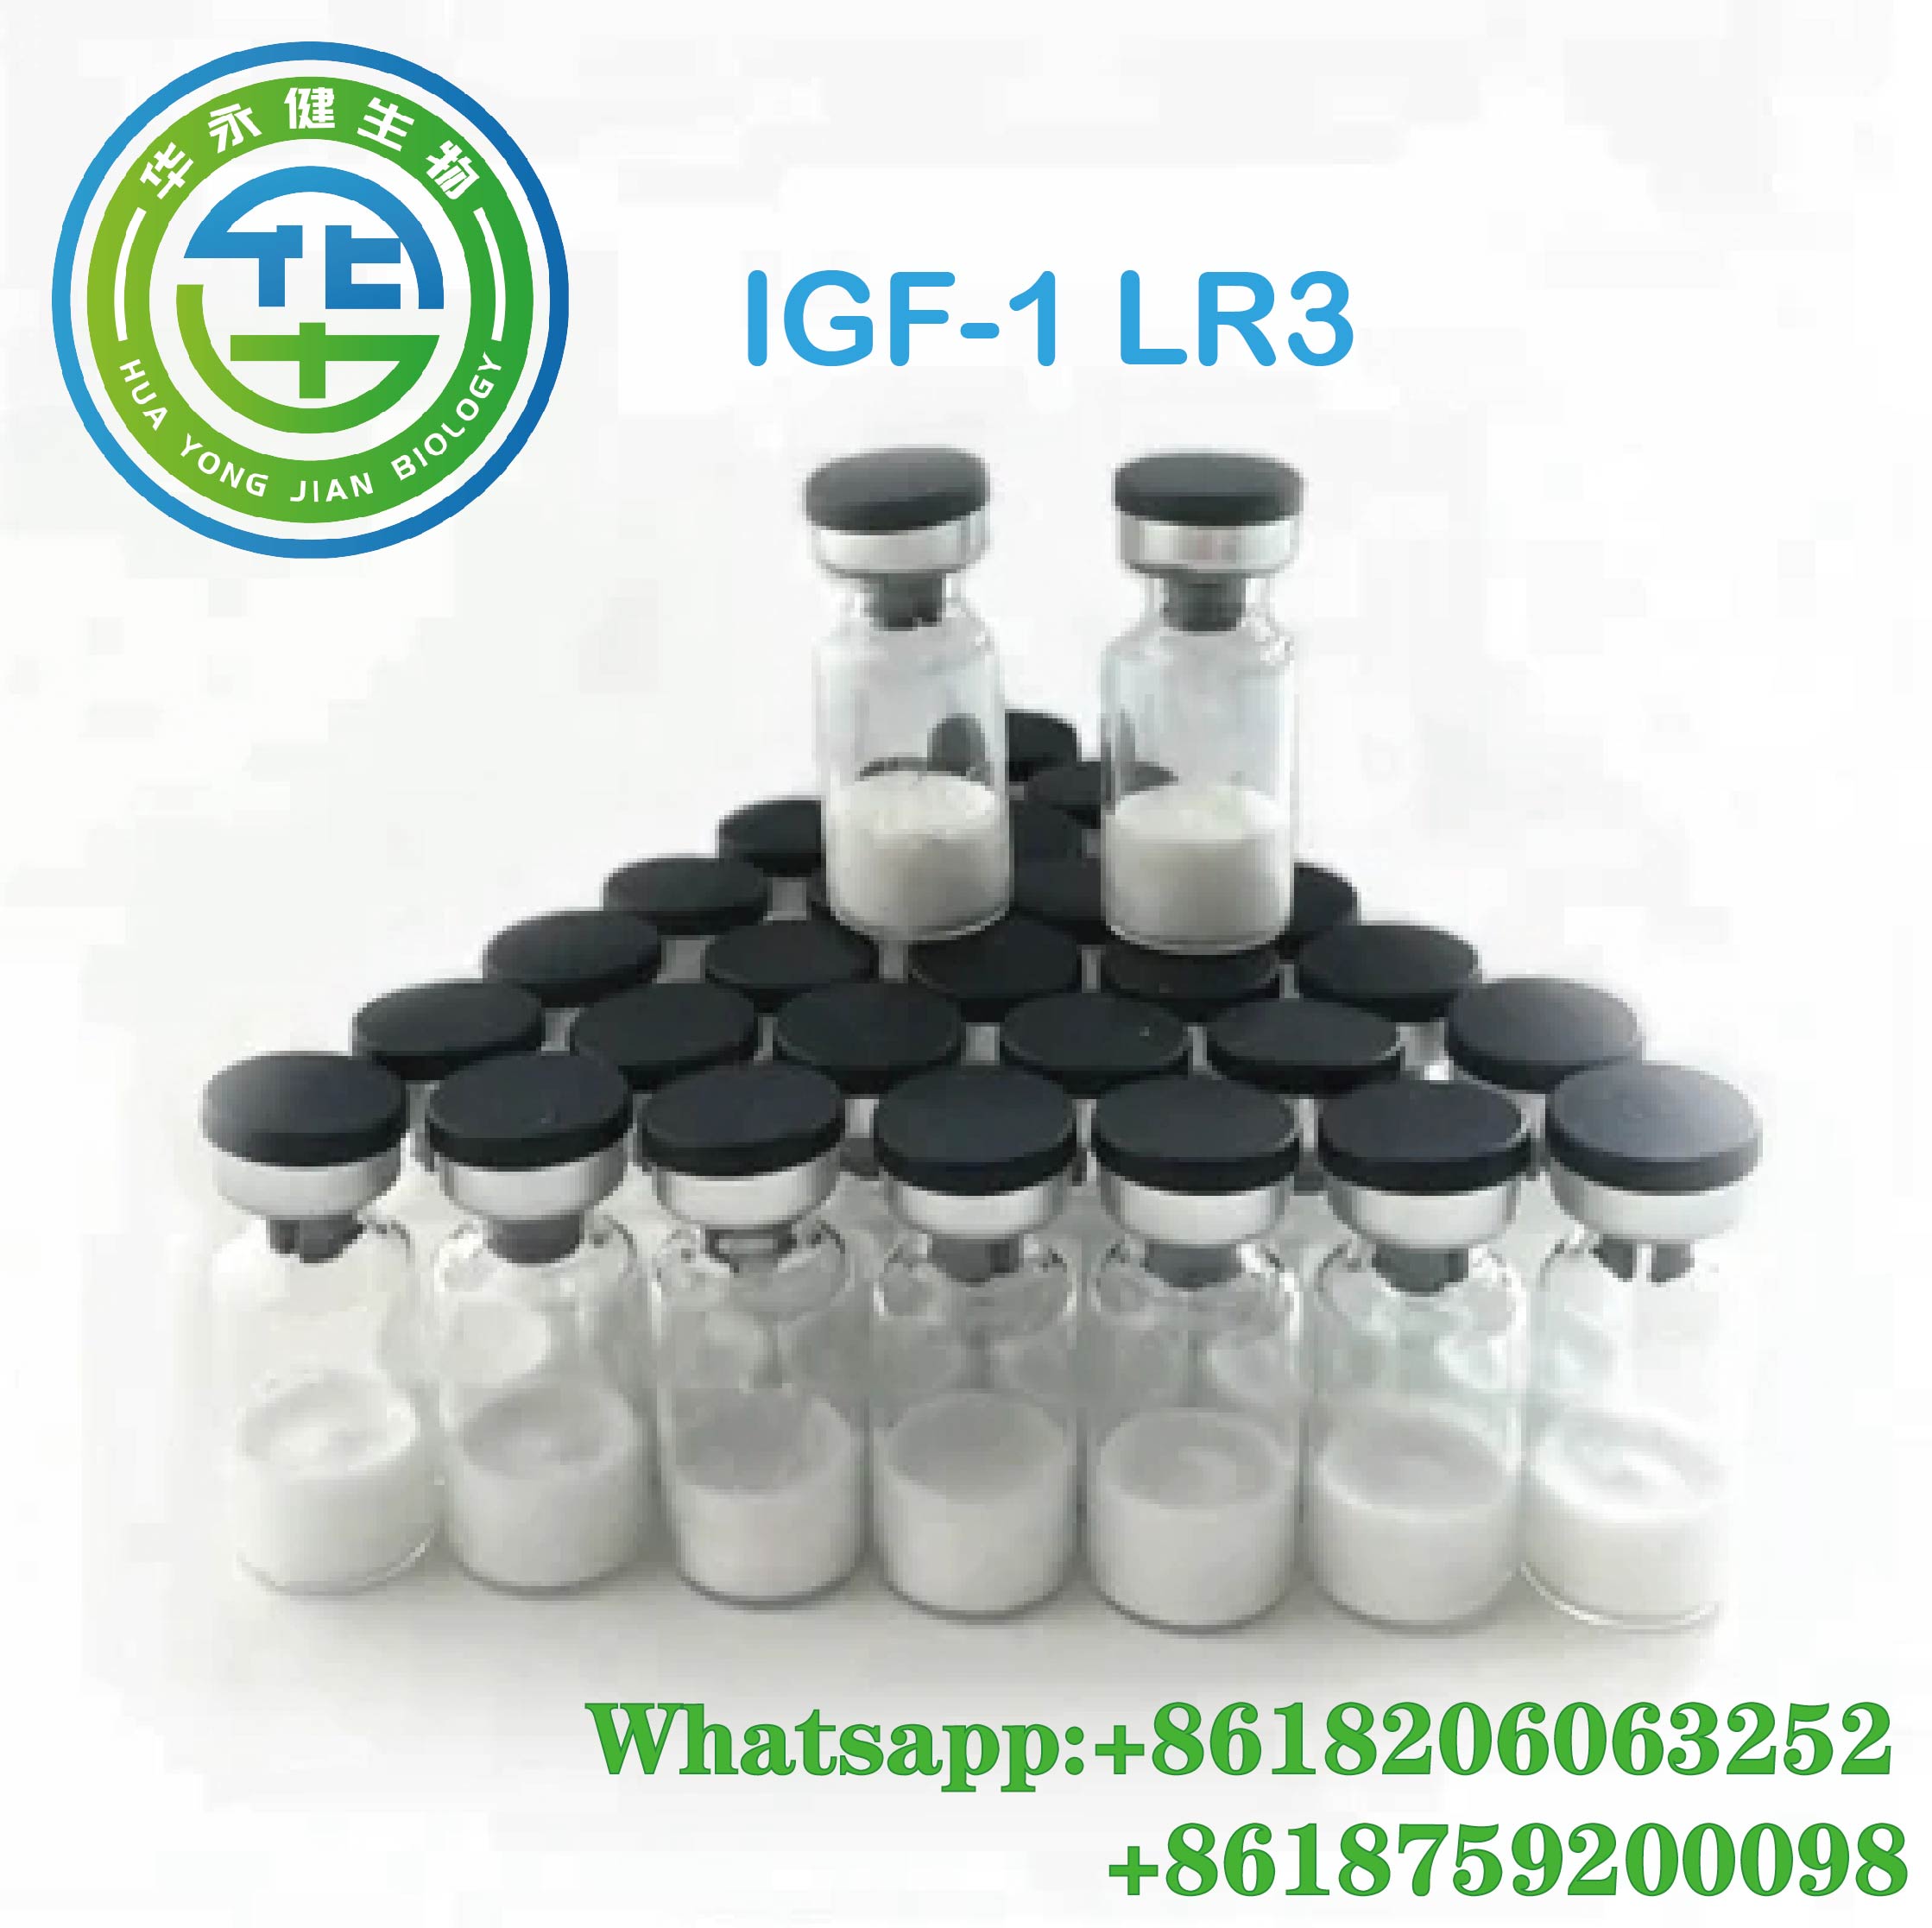 IGF-1 LR3 Human Bodybuilding Anabolic Steroids For Muscle Gaining and Muscle Growth CasNO.946870-92-4 